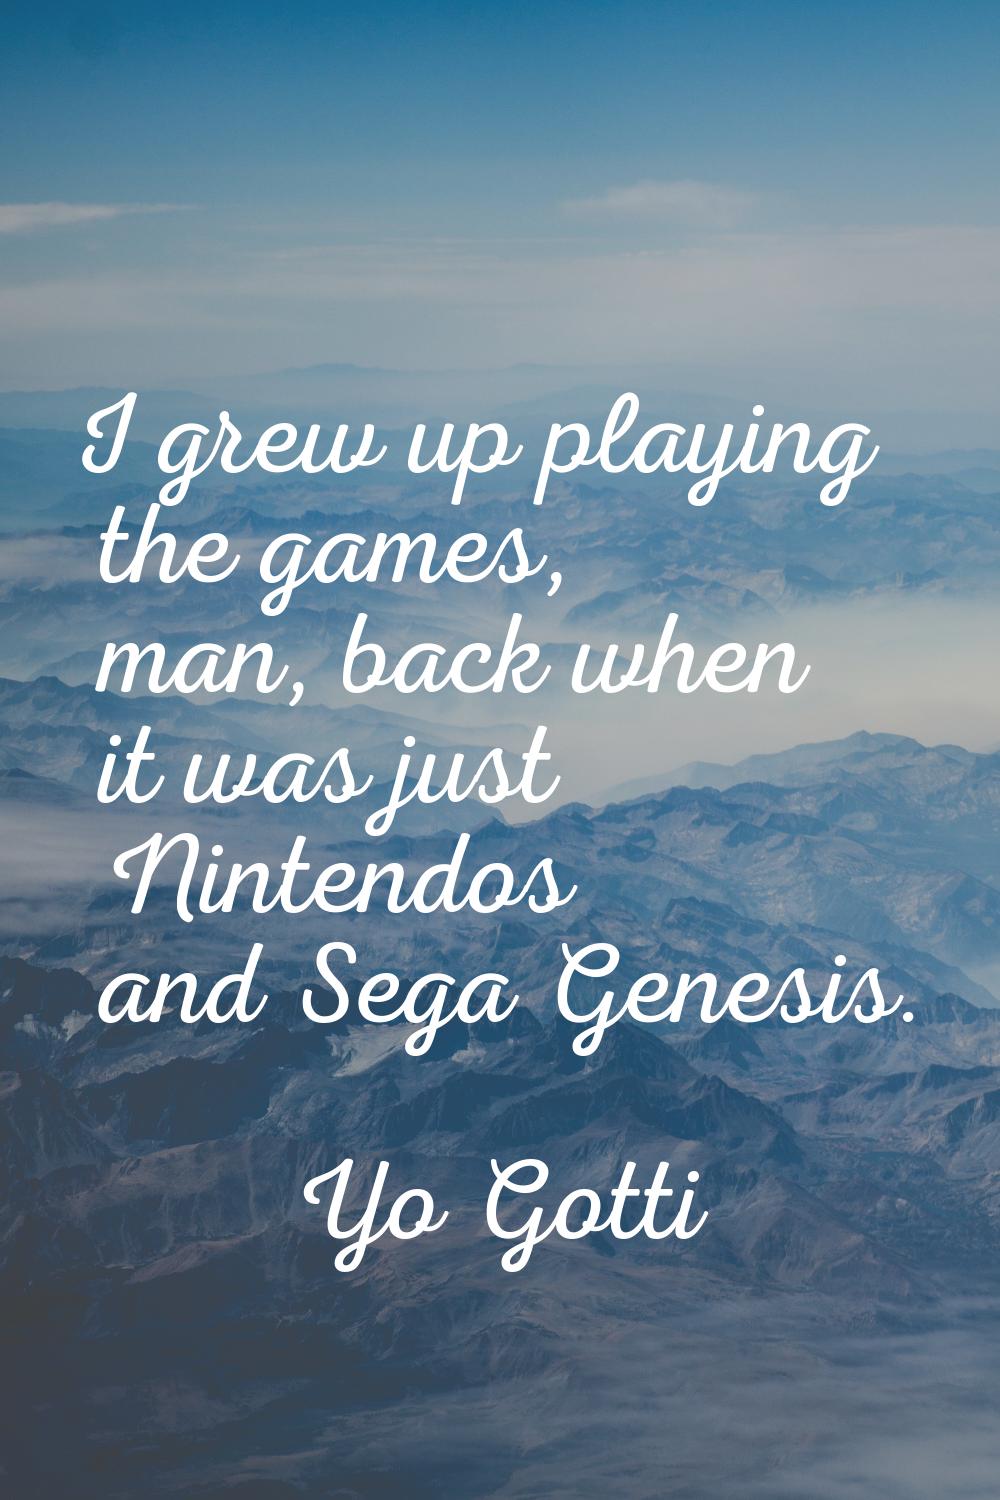 I grew up playing the games, man, back when it was just Nintendos and Sega Genesis.